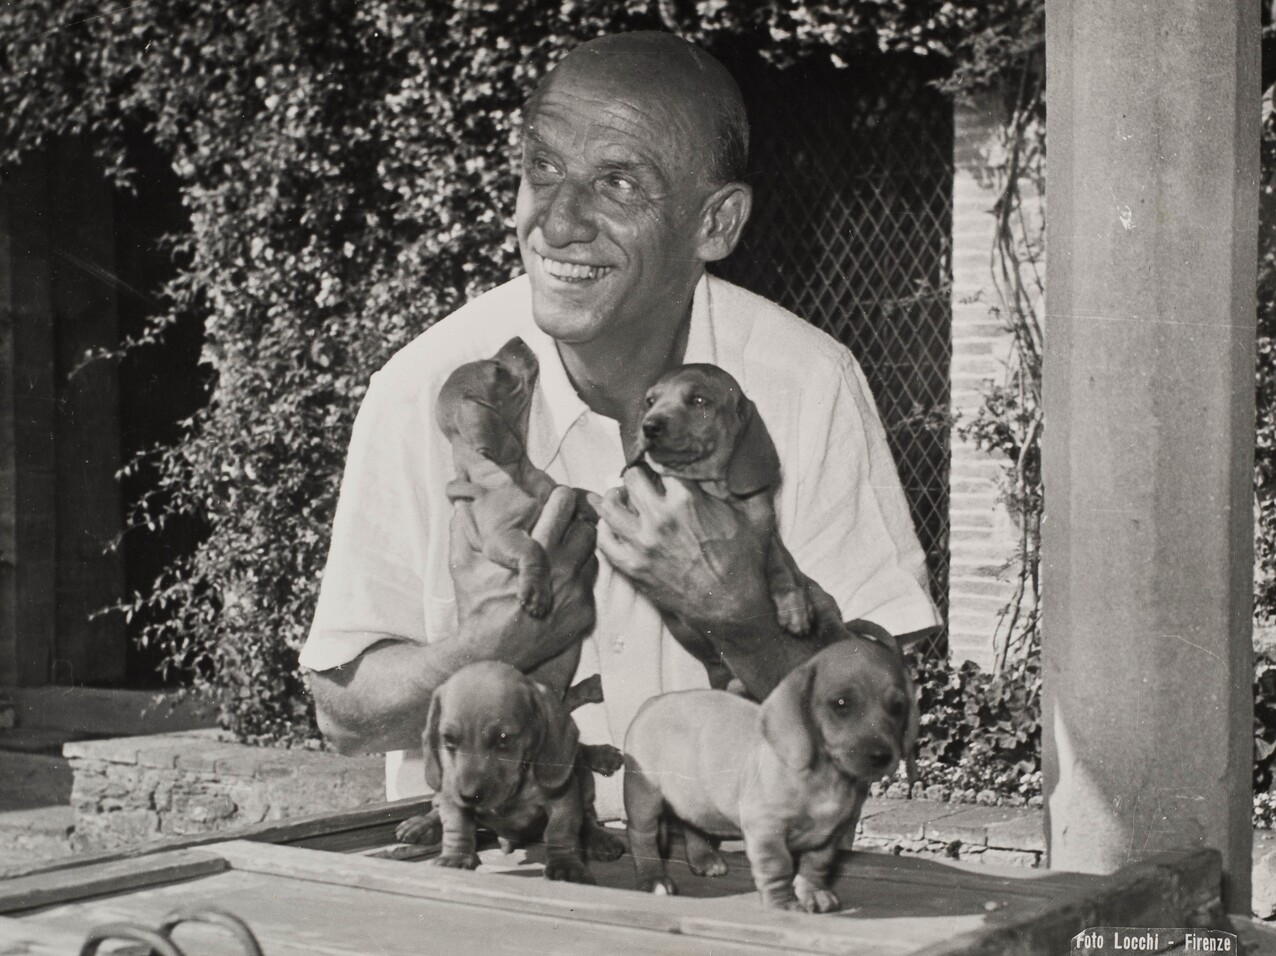 Dimitri Mitropoulos smiling and holding puppies.